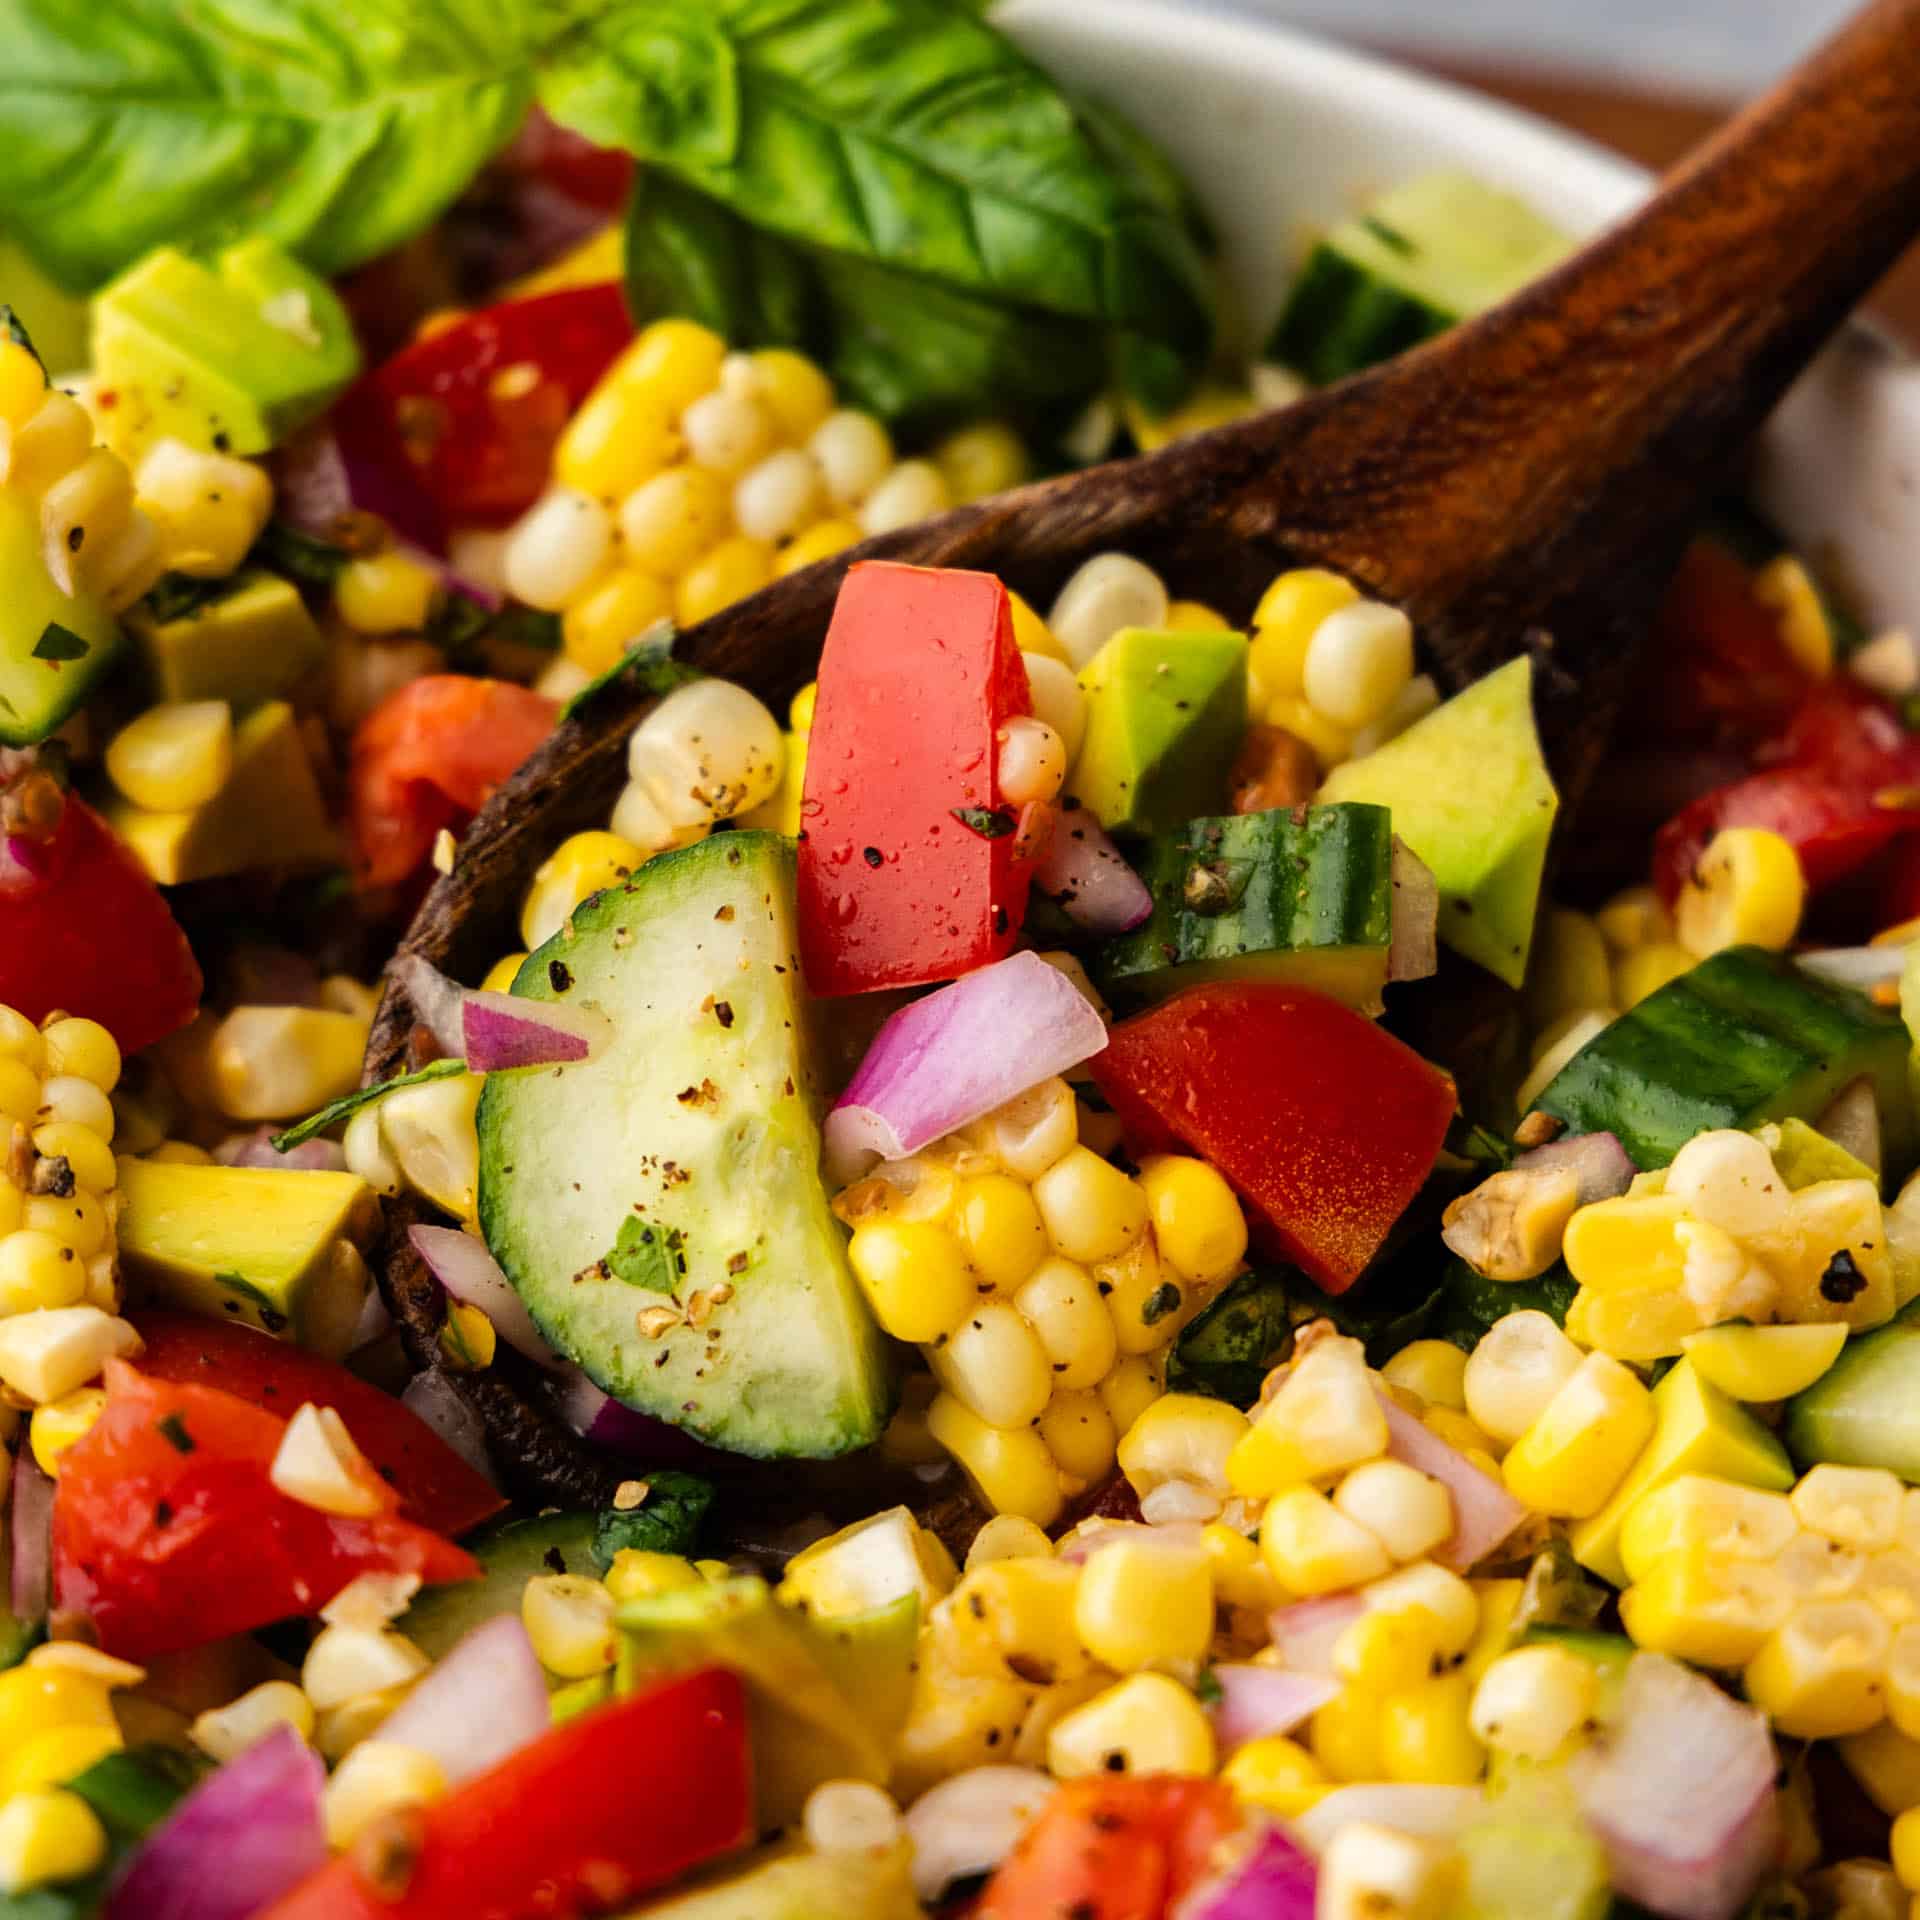 A close up view of a wooden spoon dishing out a helping of corn salad from the bowl.